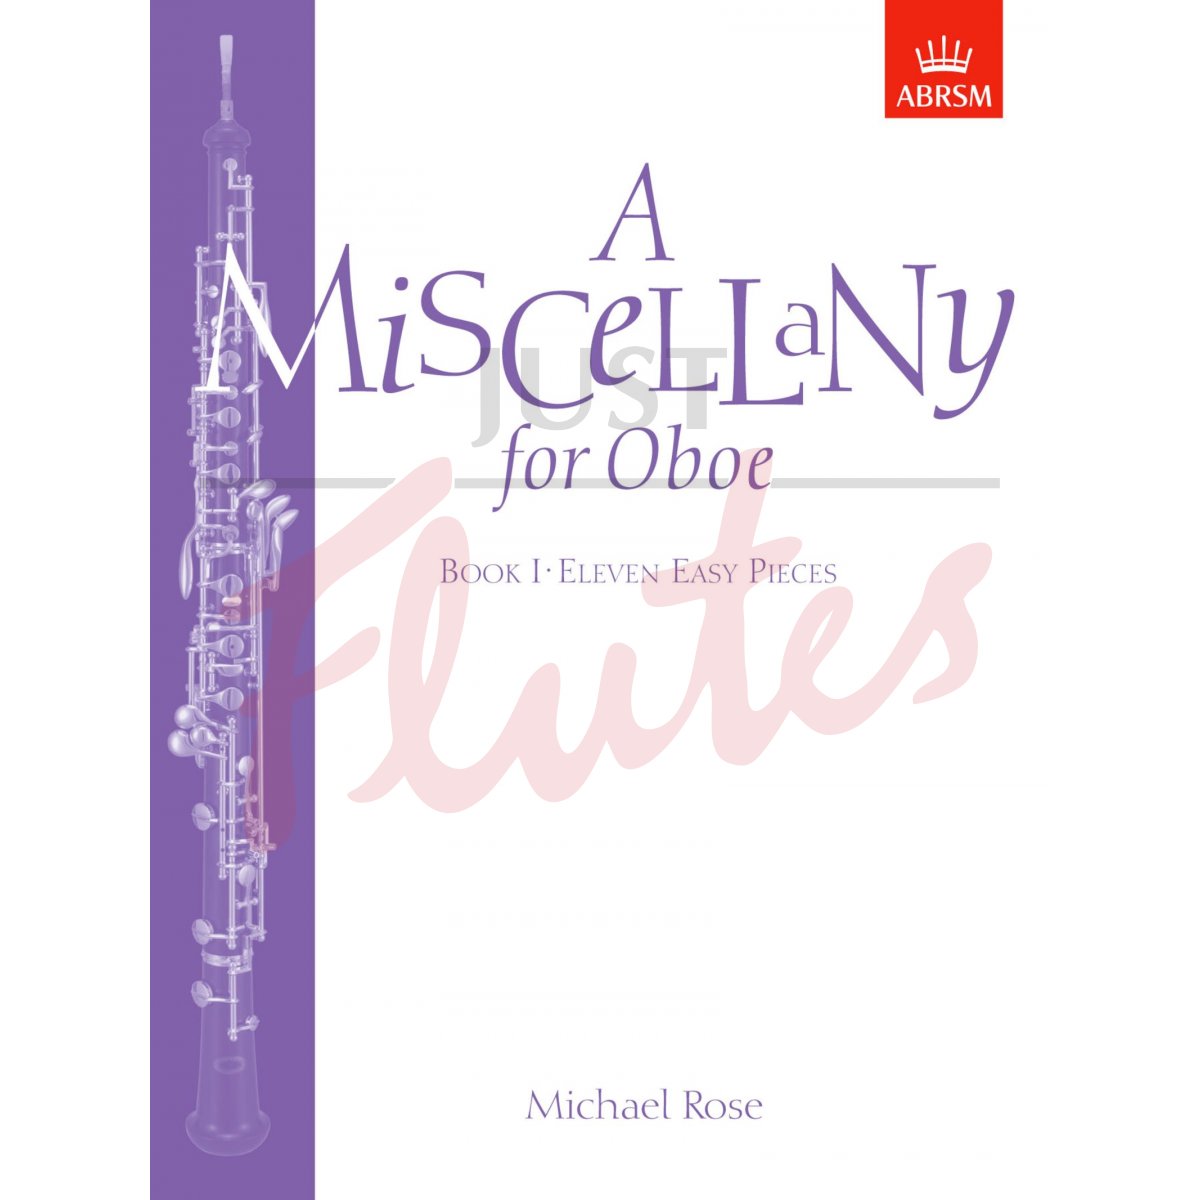 A Miscellany for Oboe Book 1